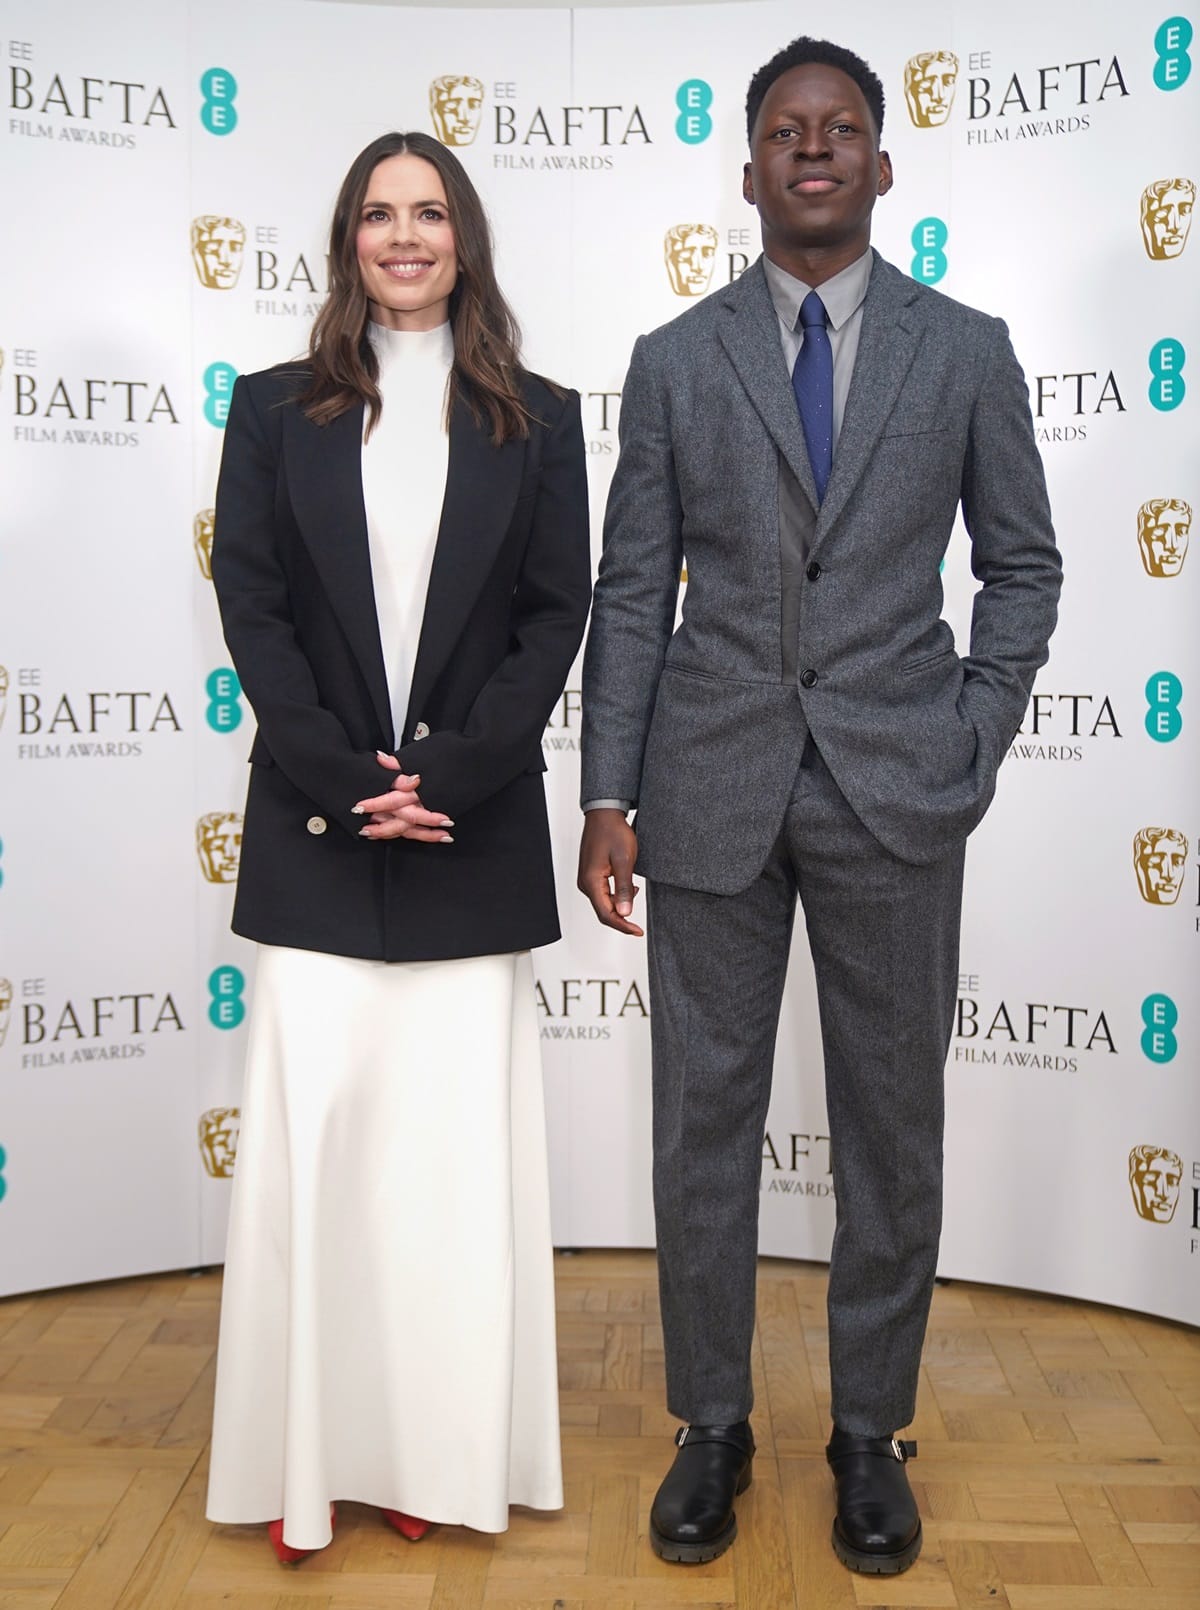 Hayley Atwell, standing 5ft 6 (167.6 cm) tall, and Toheeb Jimoh, towering over her at 6ft 0 (182.9 cm), graced the EE BAFTA Film Awards 2023 Nominations Announcement held at BAFTA Piccadilly